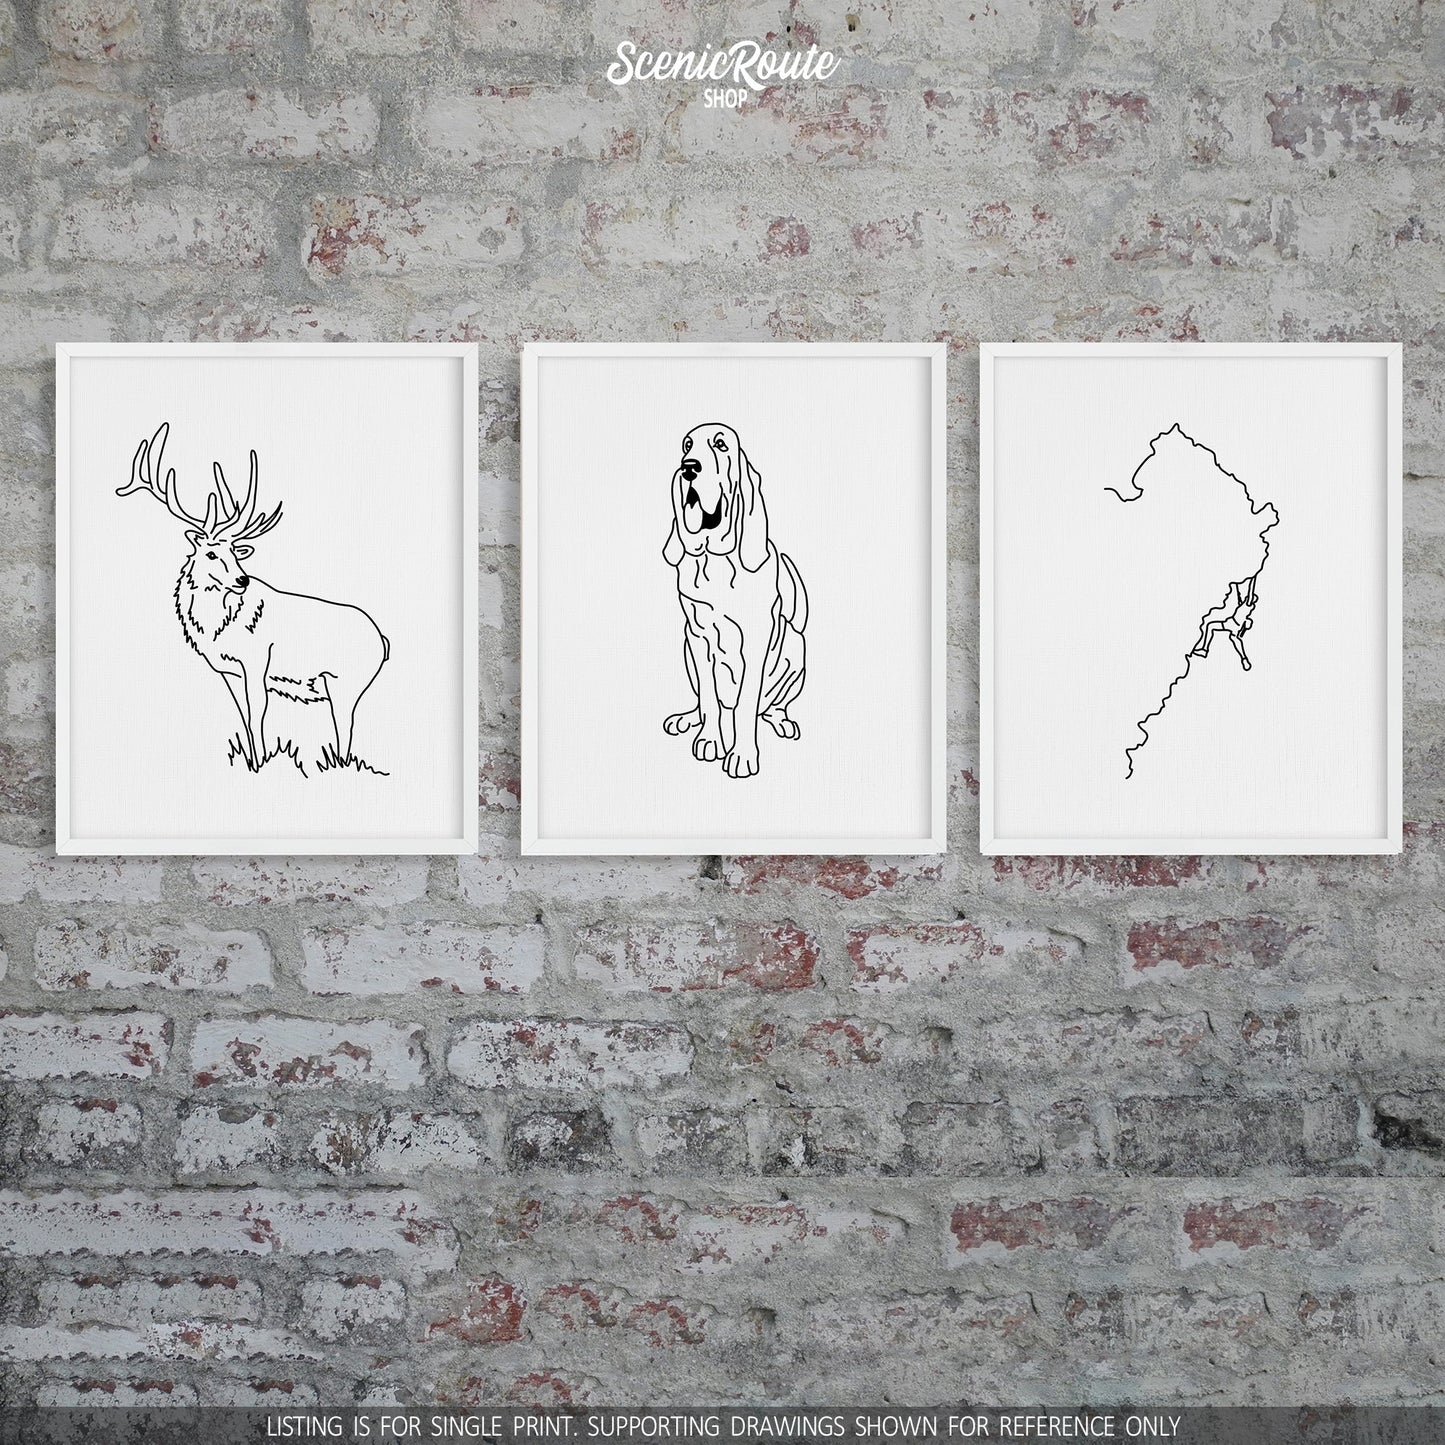 A group of three framed drawings on a brick wall.  The line art drawings include an Elk, a Bloodhound dog, and Rock Climbing